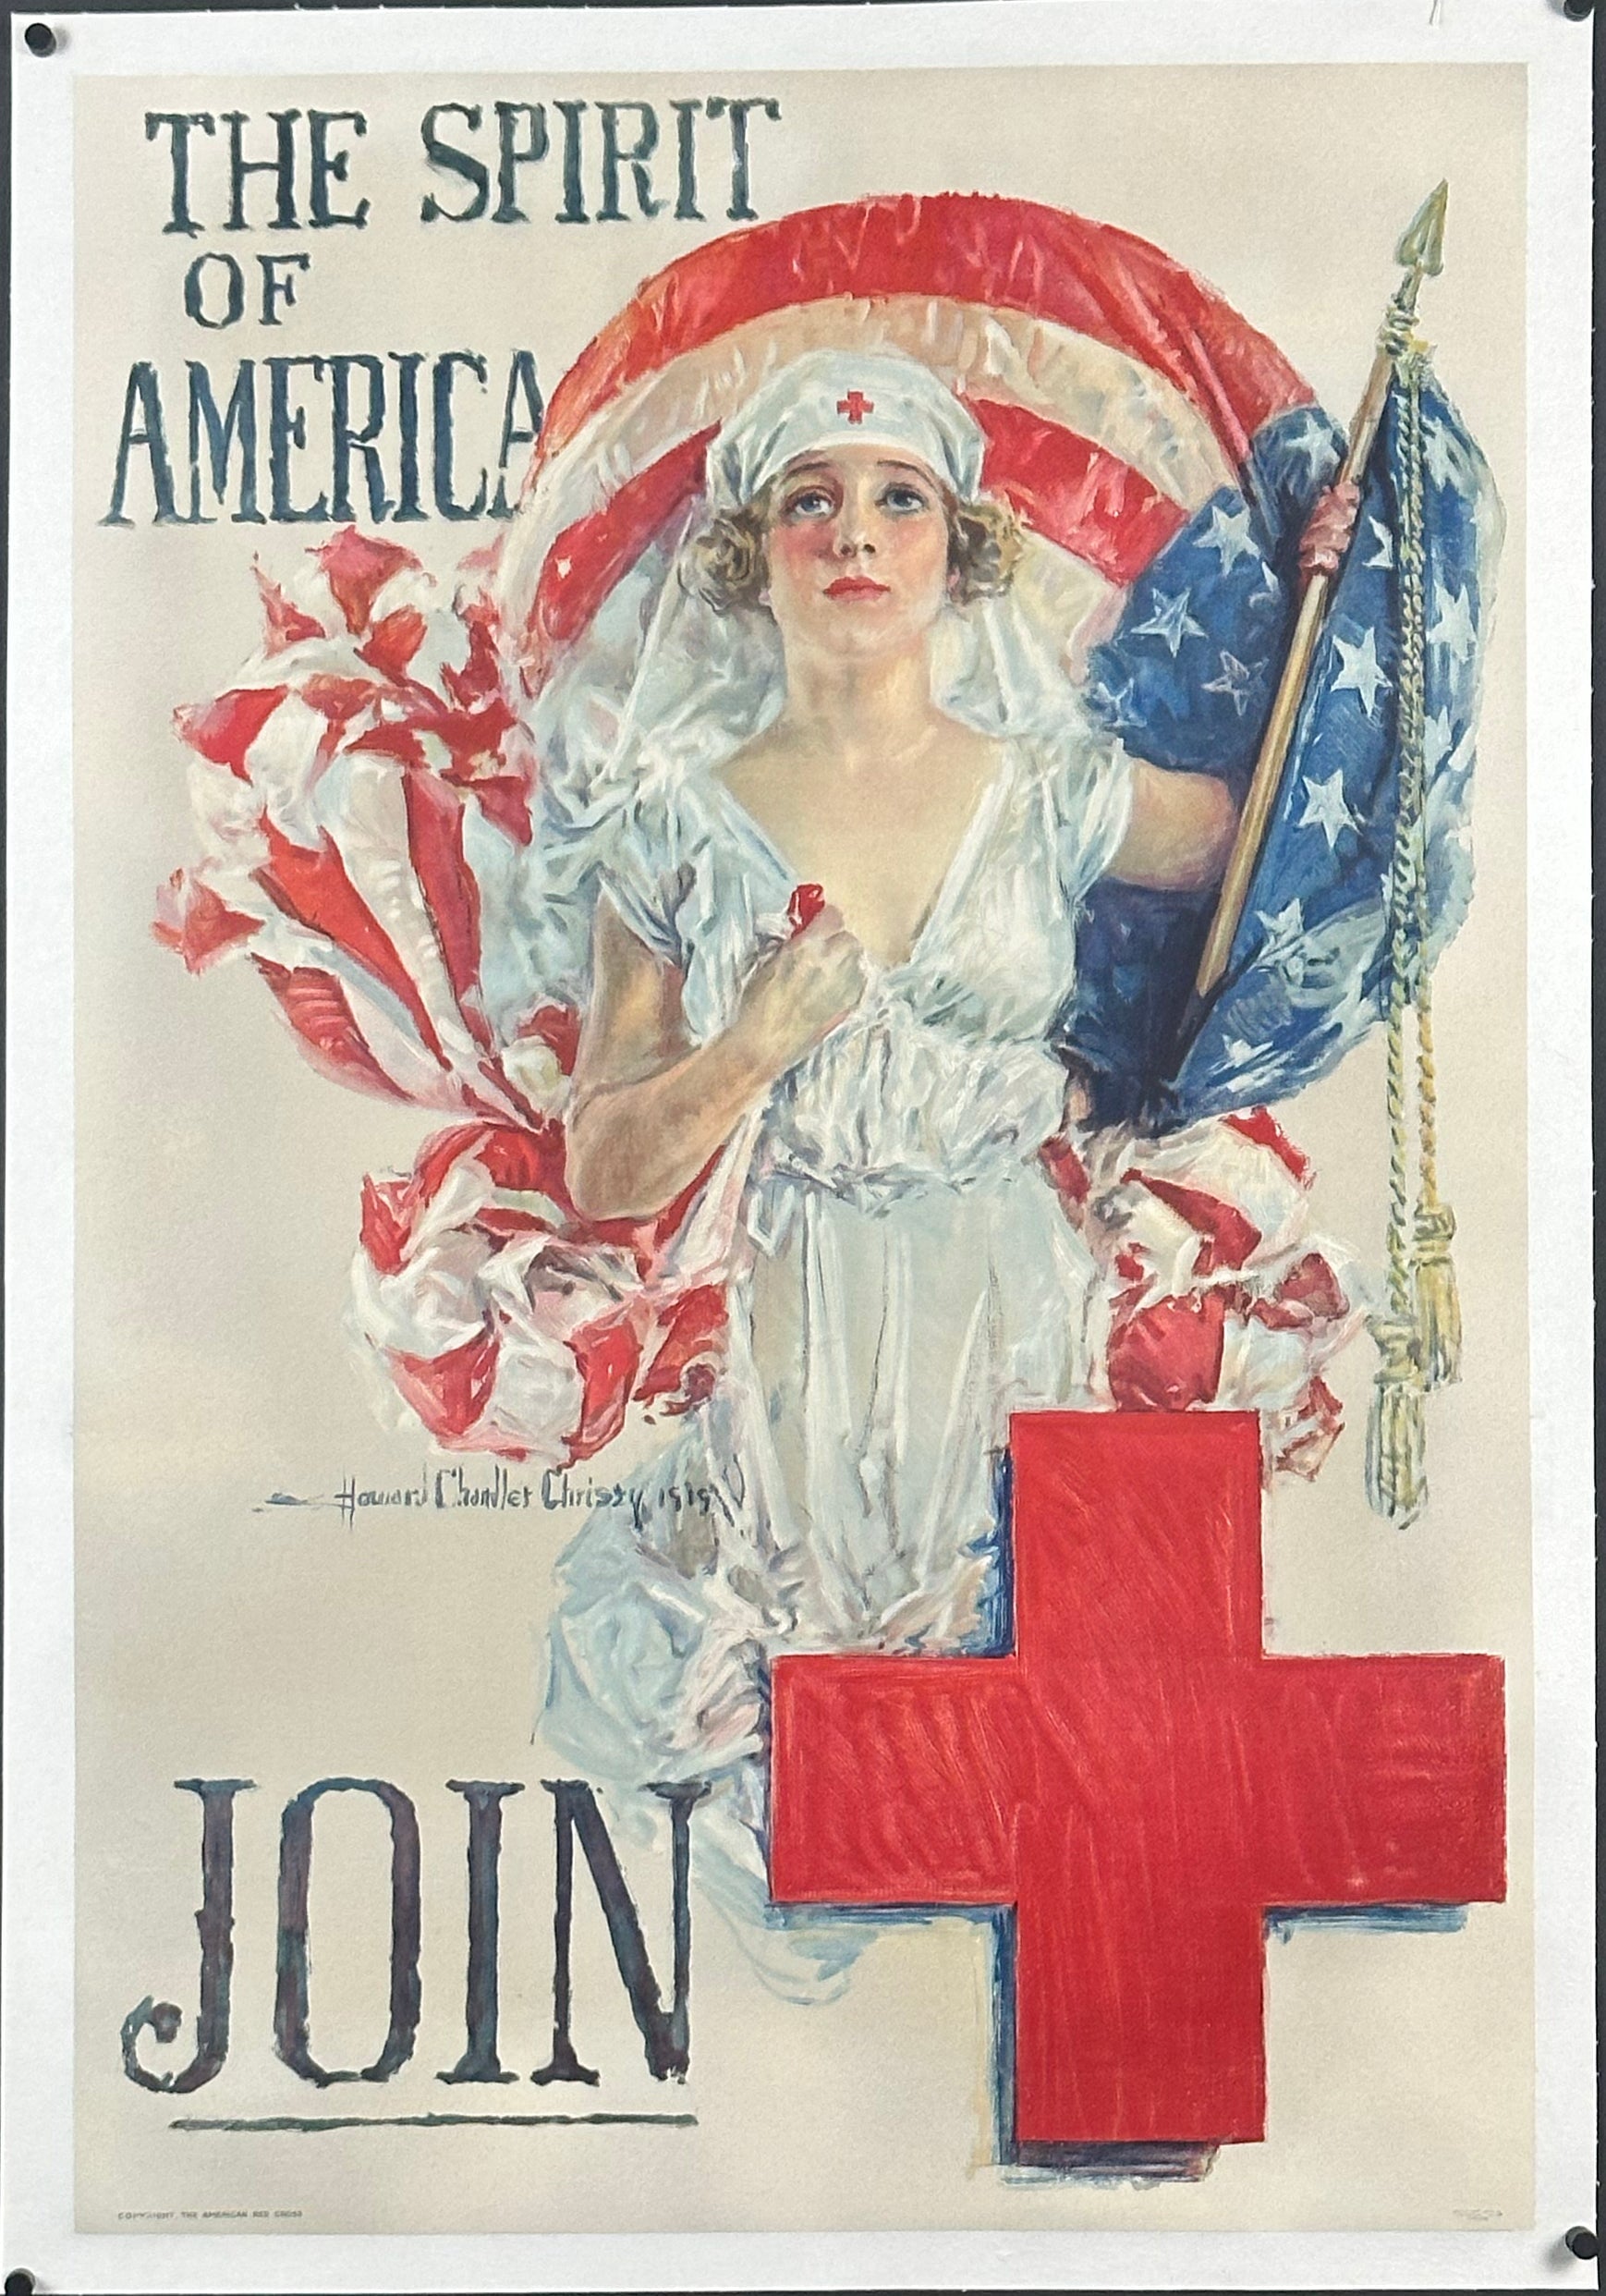 "The Spirit Of America" WWI Red Cross Recruitment Poster by Howard Chandler Christy (1919) - posterpalace.com